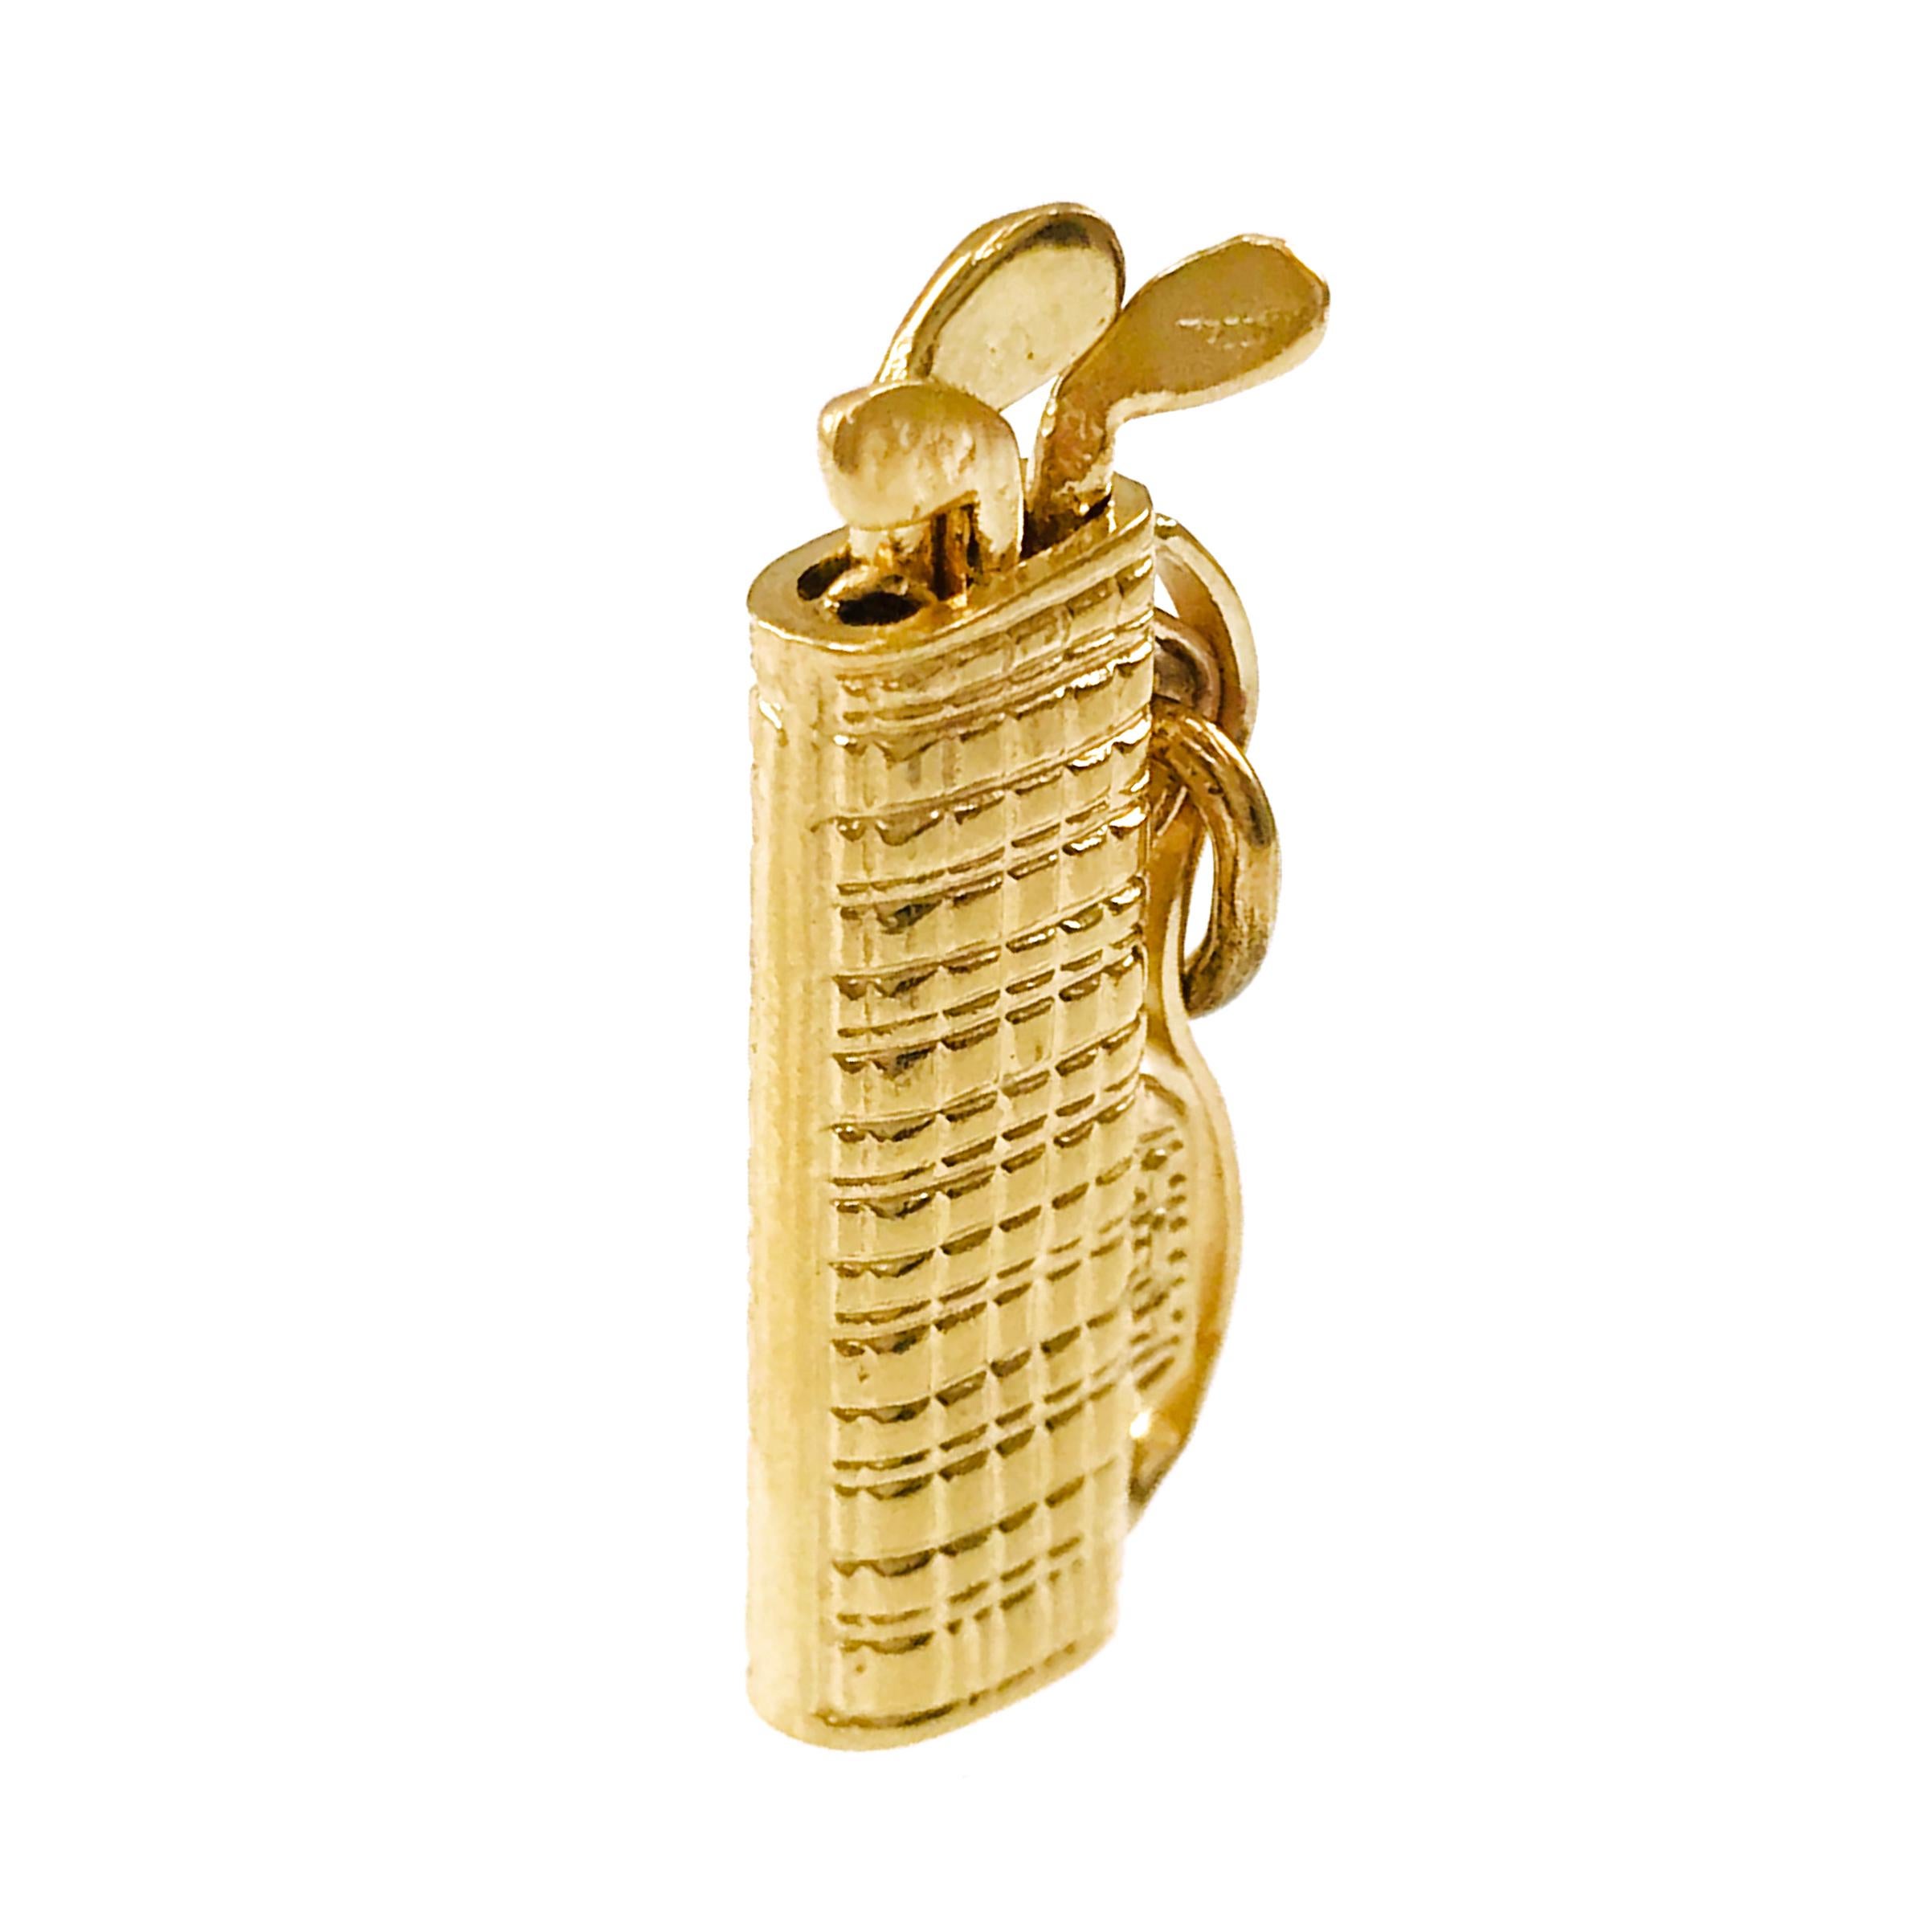 14 Karat Gold Golf Bag Pendant. The pendant features a highly-textured golf bag, side strap, and three golf clubs. The pendant measures 10.6wide x 24.71 tall x 4.21mm long. Stamped on the strap is E14. The total gold weight of the pendant is 2.7